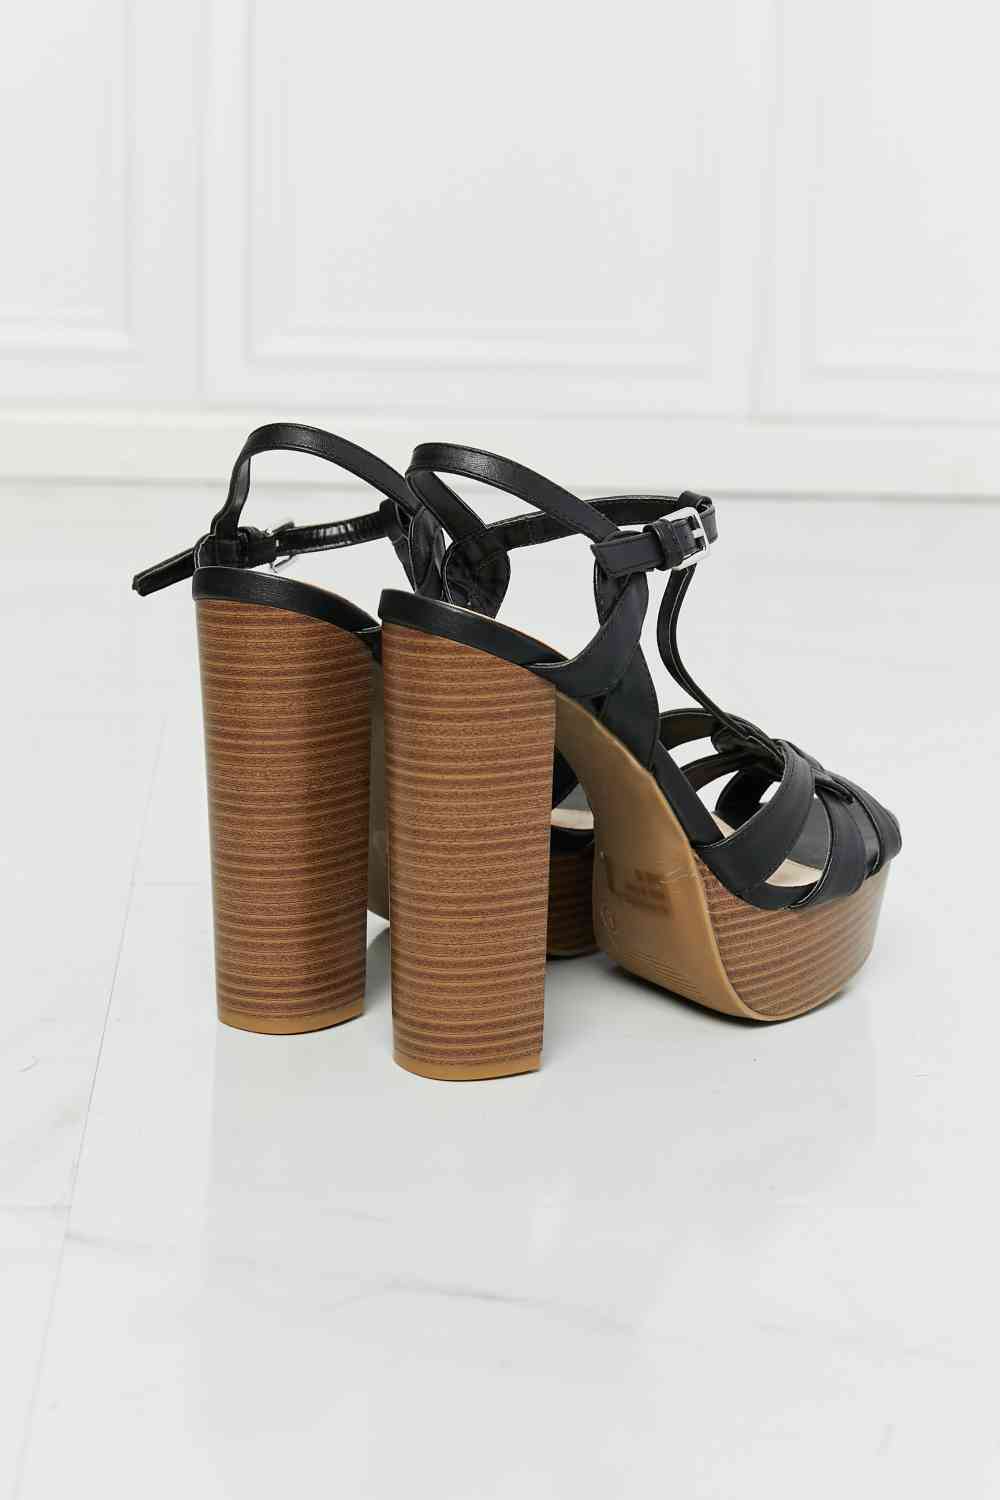 Legend She’s Classy Strappy Heels - Accessories - Shoes - 9 - 2024